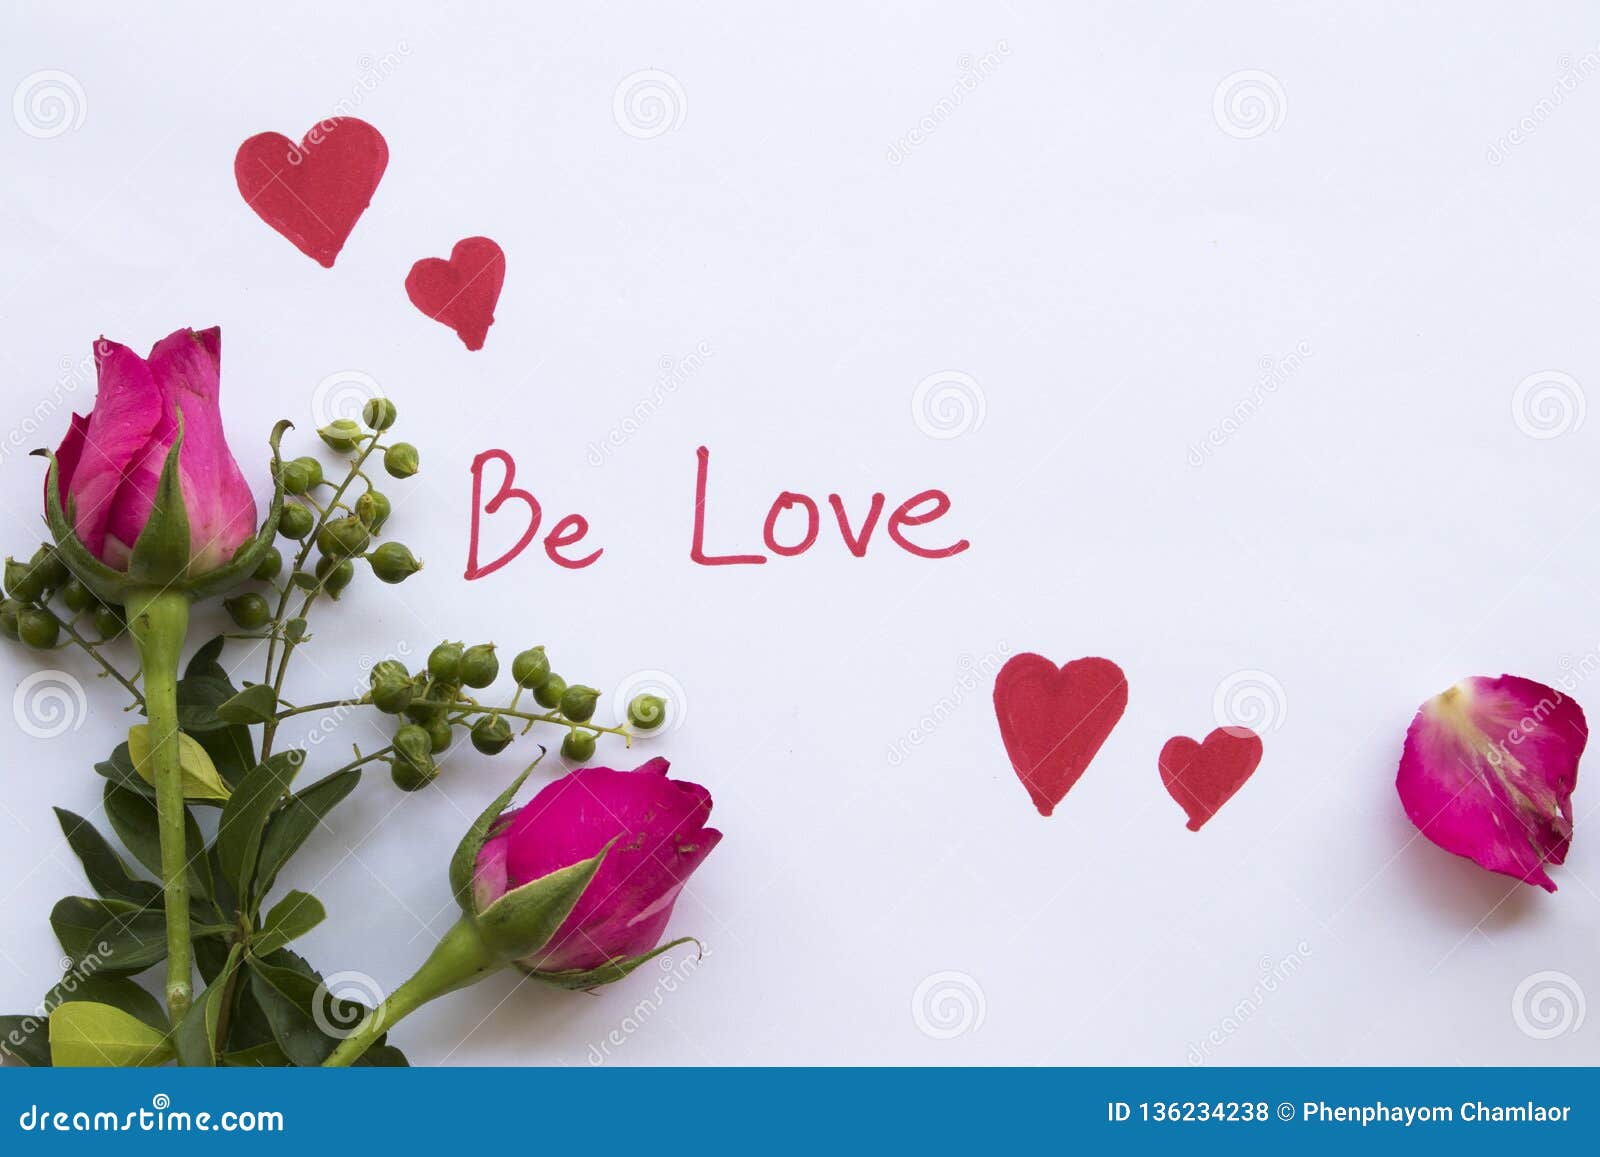 Be Love Message Card with Draw Red Heart Stock Photo - Image of ...